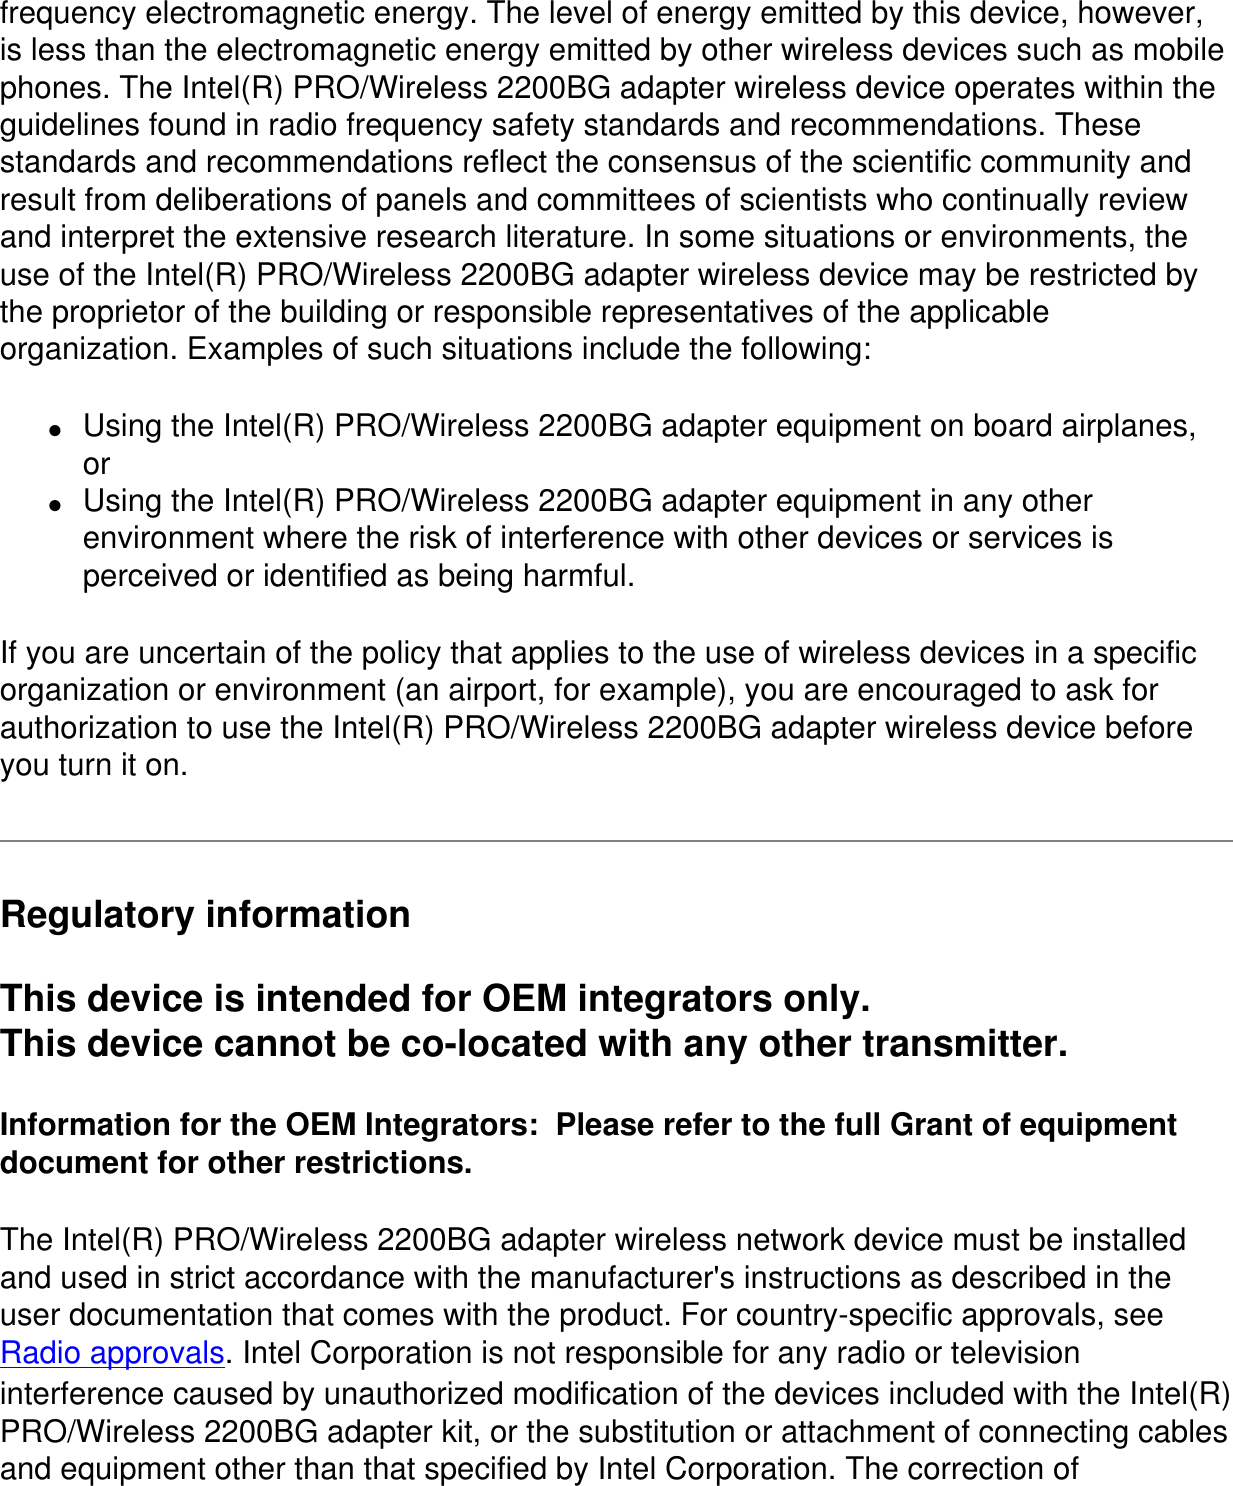 frequency electromagnetic energy. The level of energy emitted by this device, however, is less than the electromagnetic energy emitted by other wireless devices such as mobile phones. The Intel(R) PRO/Wireless 2200BG adapter wireless device operates within the guidelines found in radio frequency safety standards and recommendations. These standards and recommendations reflect the consensus of the scientific community and result from deliberations of panels and committees of scientists who continually review and interpret the extensive research literature. In some situations or environments, the use of the Intel(R) PRO/Wireless 2200BG adapter wireless device may be restricted by the proprietor of the building or responsible representatives of the applicable organization. Examples of such situations include the following:●     Using the Intel(R) PRO/Wireless 2200BG adapter equipment on board airplanes, or●     Using the Intel(R) PRO/Wireless 2200BG adapter equipment in any other environment where the risk of interference with other devices or services is perceived or identified as being harmful.If you are uncertain of the policy that applies to the use of wireless devices in a specific organization or environment (an airport, for example), you are encouraged to ask for authorization to use the Intel(R) PRO/Wireless 2200BG adapter wireless device before you turn it on.Regulatory informationThis device is intended for OEM integrators only.This device cannot be co-located with any other transmitter.Information for the OEM Integrators:  Please refer to the full Grant of equipment document for other restrictions.The Intel(R) PRO/Wireless 2200BG adapter wireless network device must be installed and used in strict accordance with the manufacturer&apos;s instructions as described in the user documentation that comes with the product. For country-specific approvals, see Radio approvals. Intel Corporation is not responsible for any radio or television interference caused by unauthorized modification of the devices included with the Intel(R) PRO/Wireless 2200BG adapter kit, or the substitution or attachment of connecting cables and equipment other than that specified by Intel Corporation. The correction of 